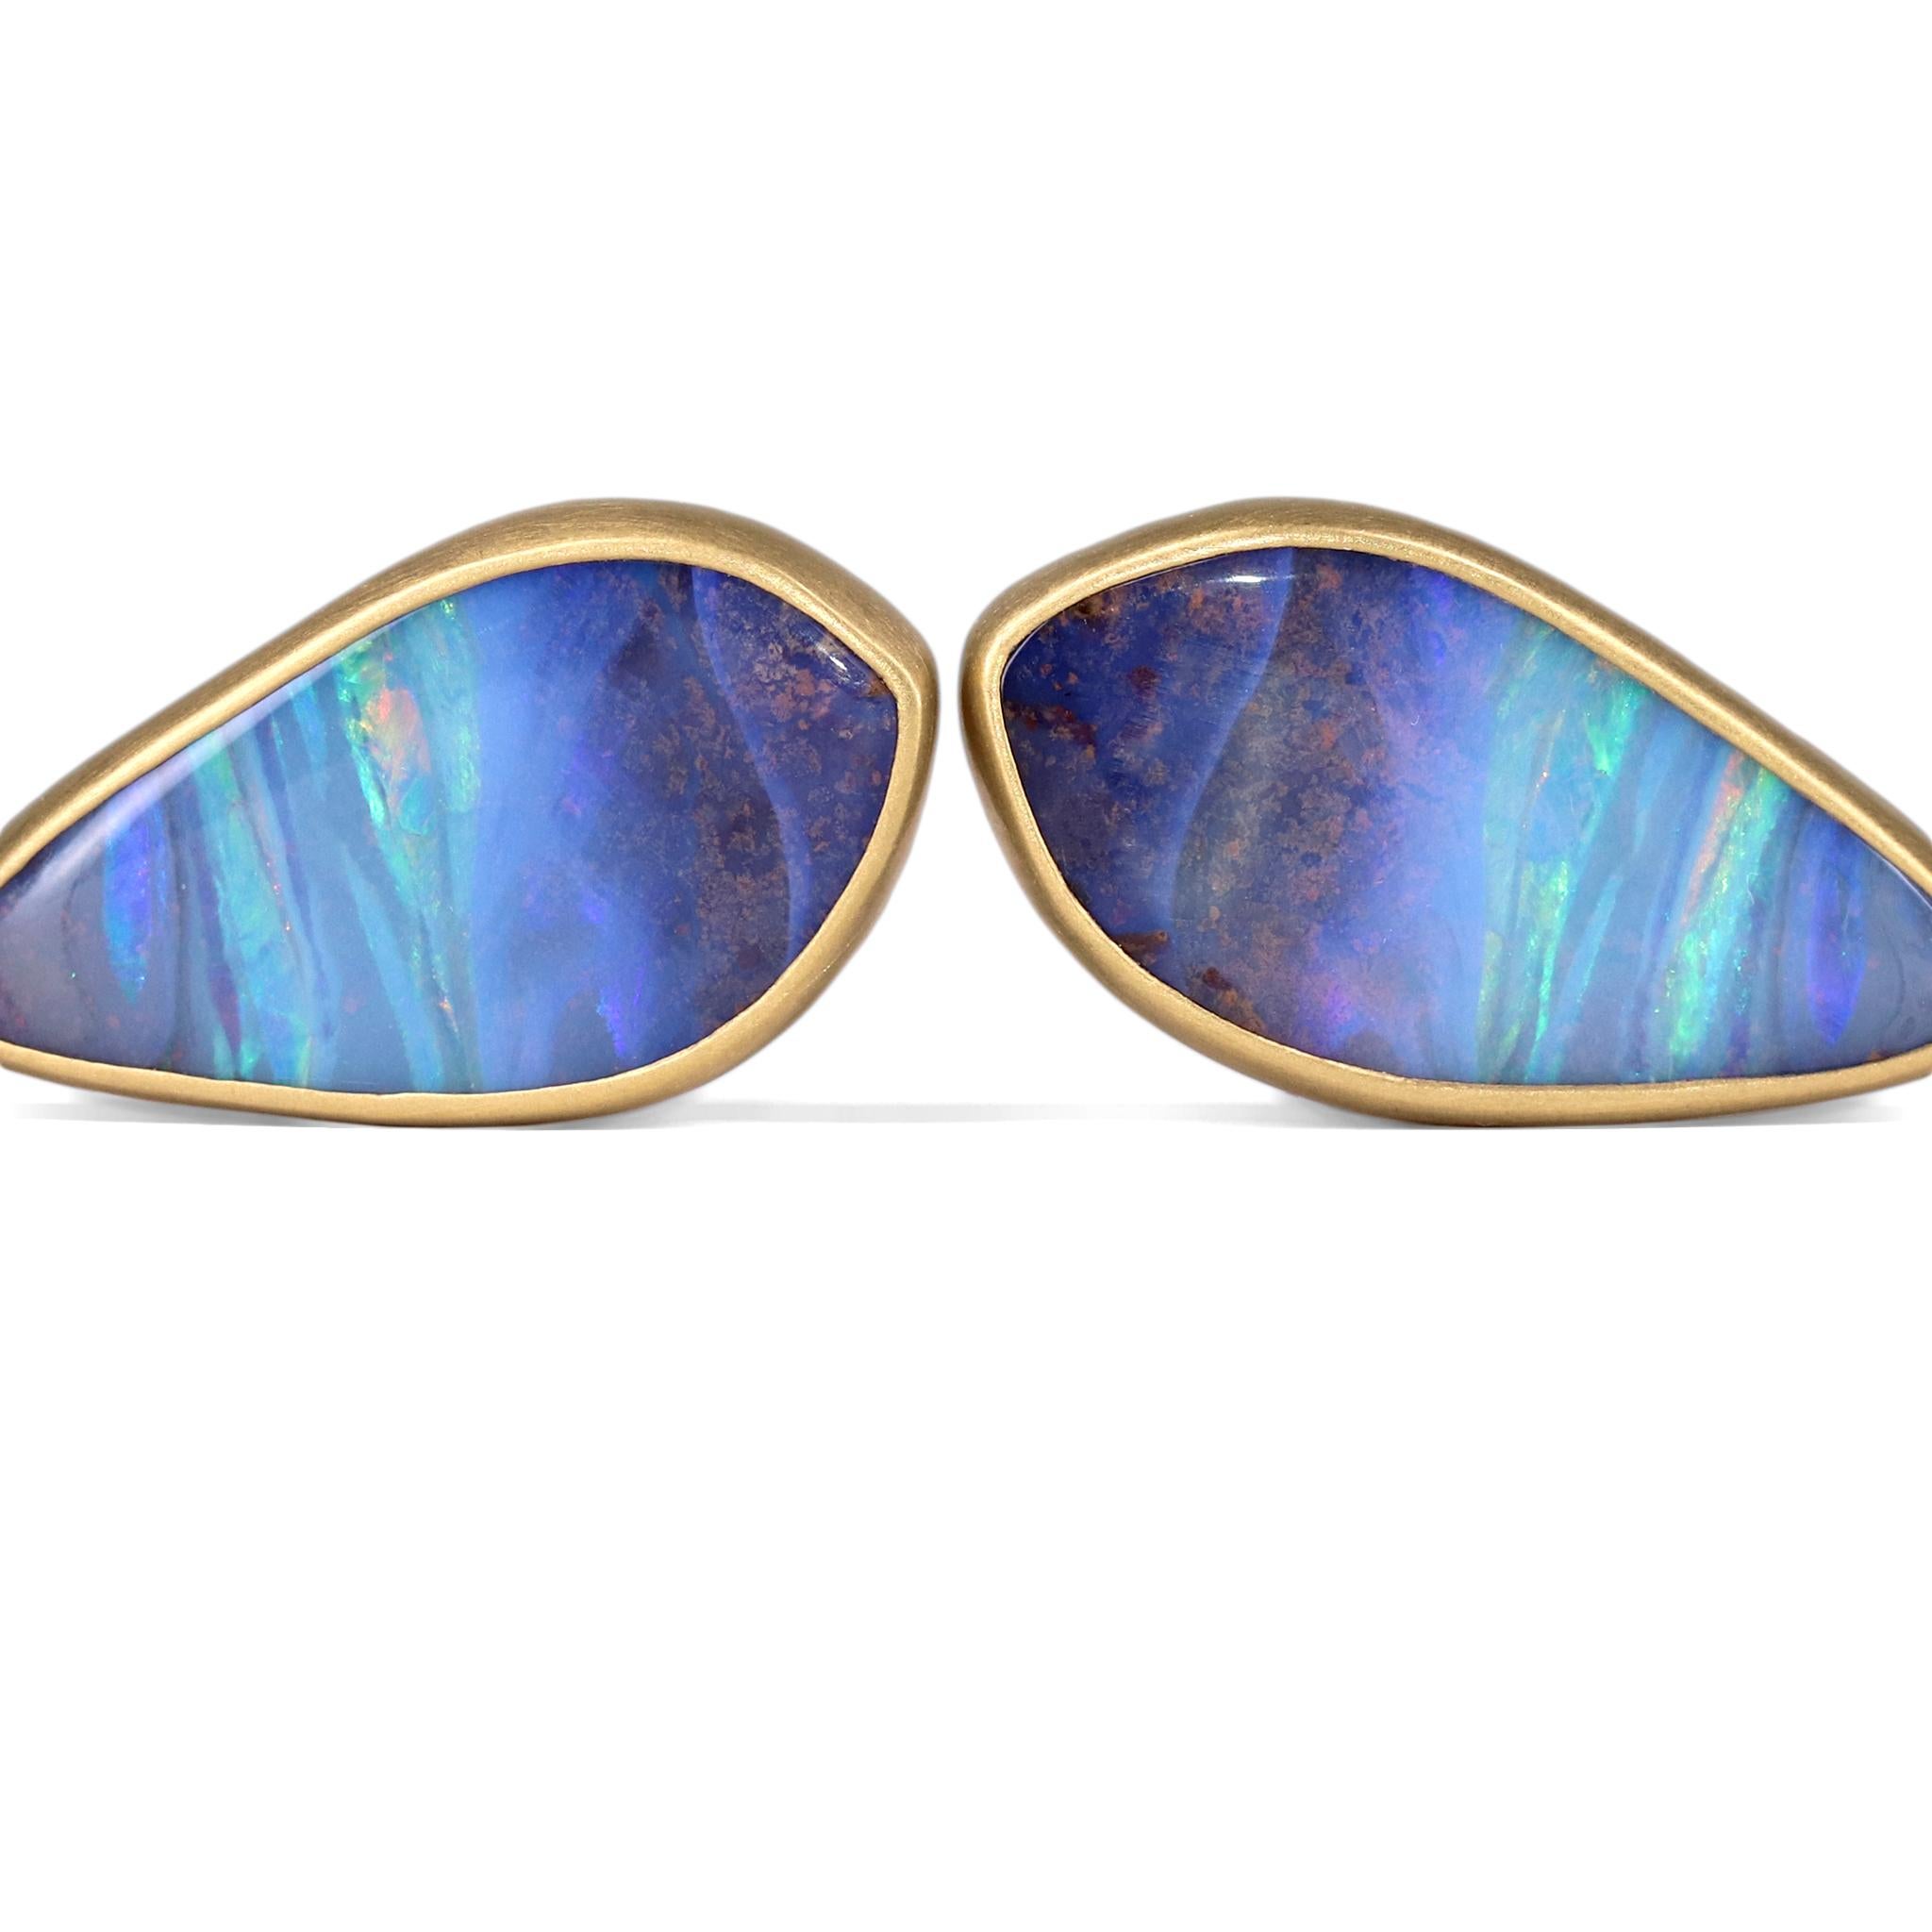 One of a Kind Earrings hot off the bench from award-winning maker Lola Brooks, hand-fabricated in 22k yellow gold showcasing a spectacular, fiery pair of oceanic boulder opal totaling 13.98carats, bezel-set beneath a matched pair of Columbian